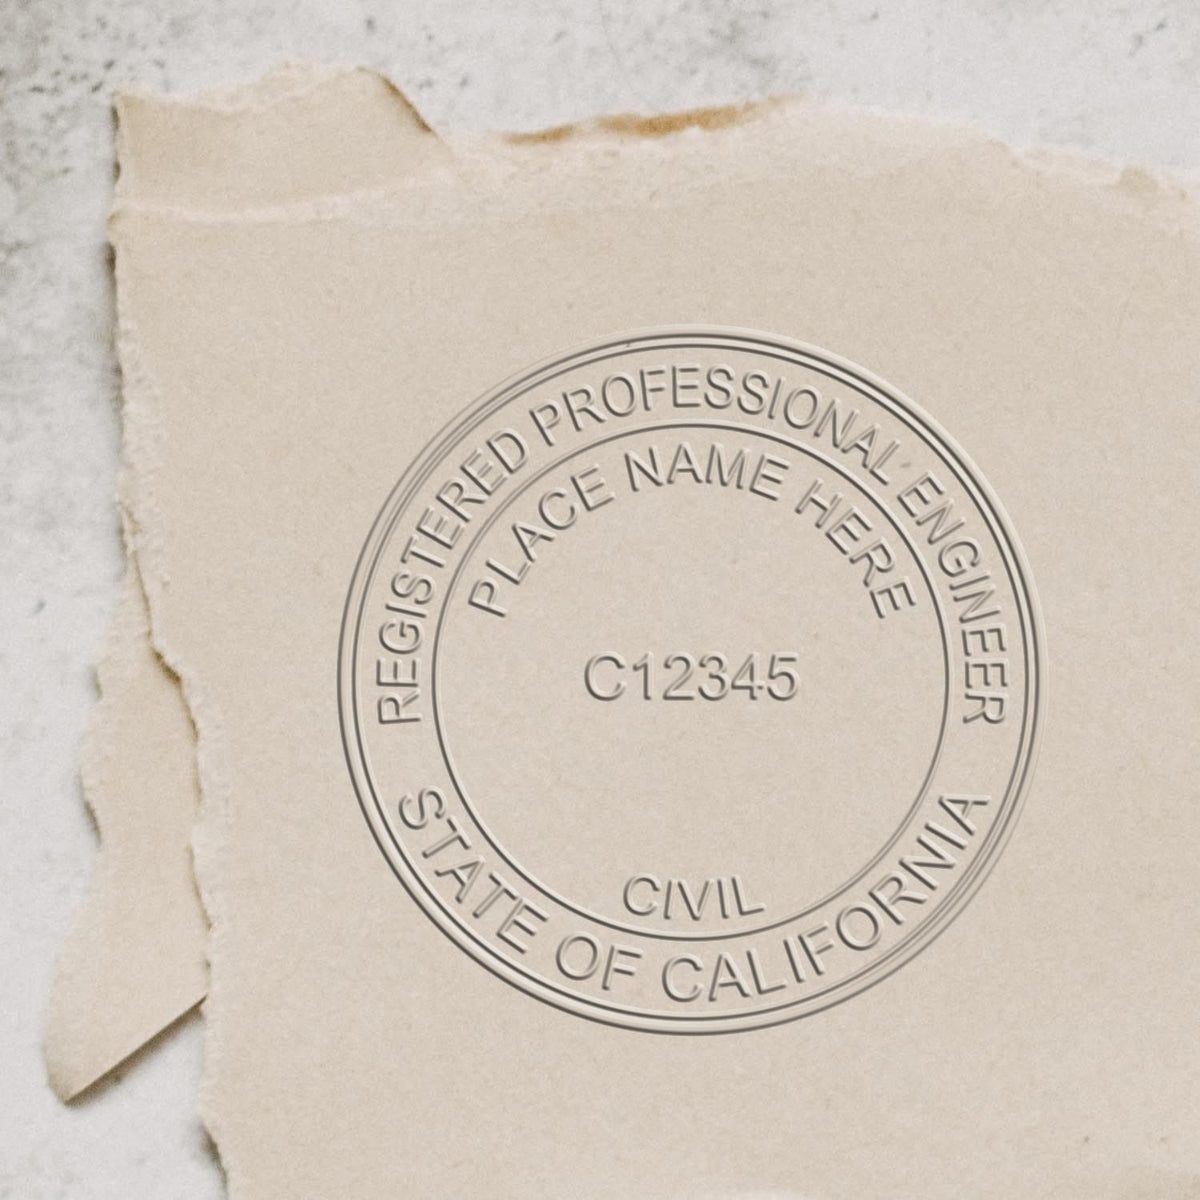 A lifestyle photo showing a stamped image of the Handheld California Professional Engineer Embosser on a piece of paper